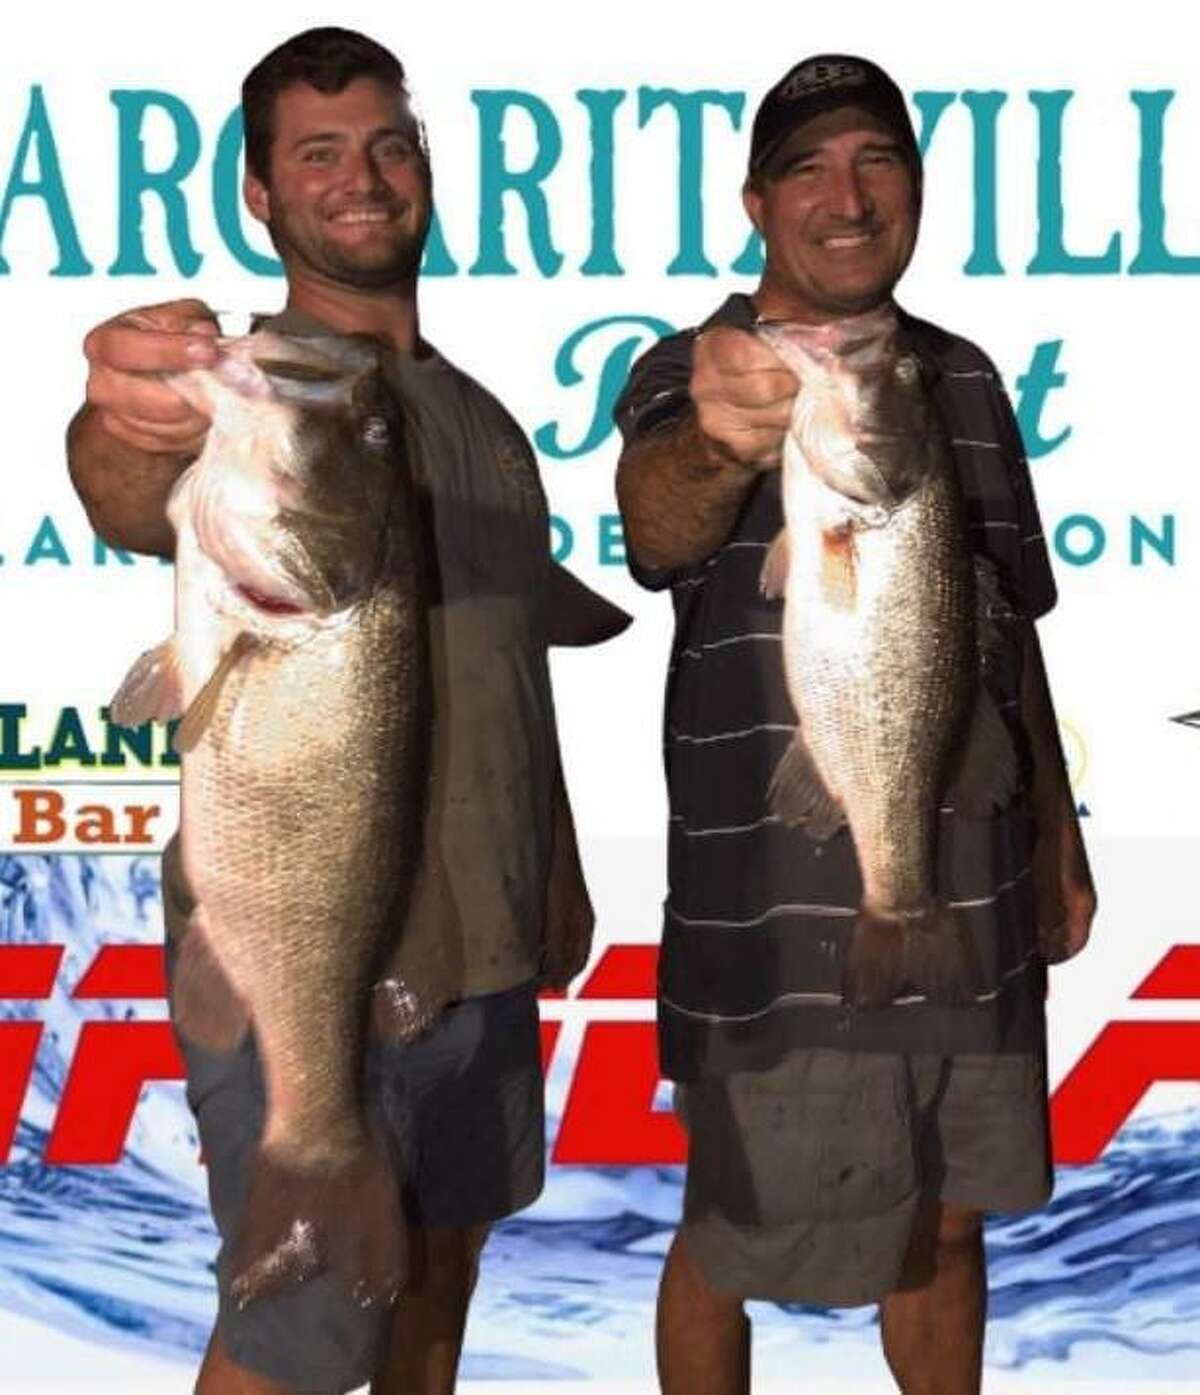 Rober Baney and DJ Strother came in first place in the CONROEBASS Tuesday Tournament with a total weight of 9.75 pounds.